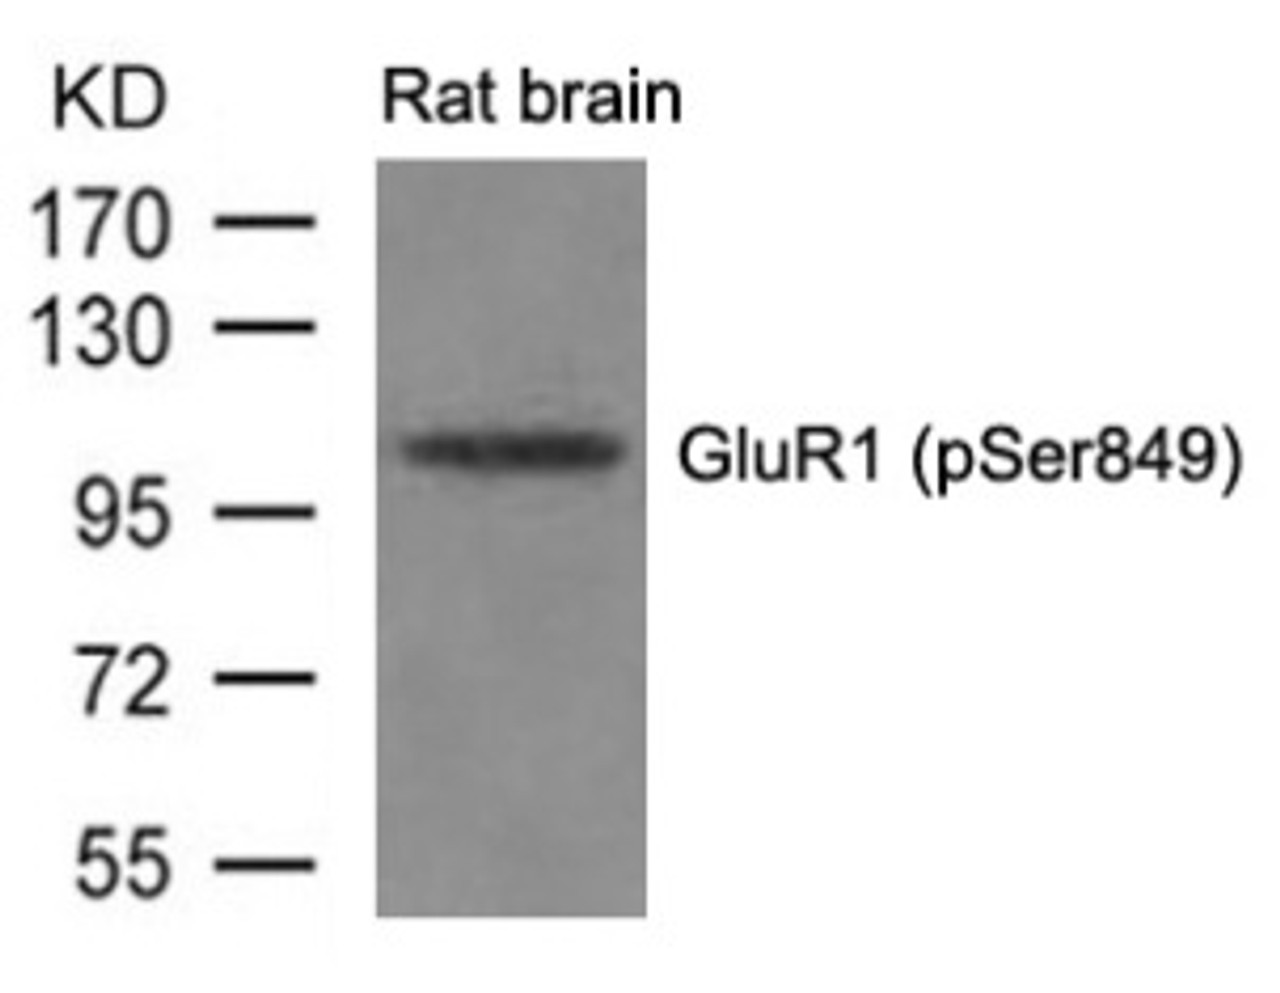 Western blot analysis of lysed extracts from Rat brain tissue using GluR1 (phospho-Ser849) .